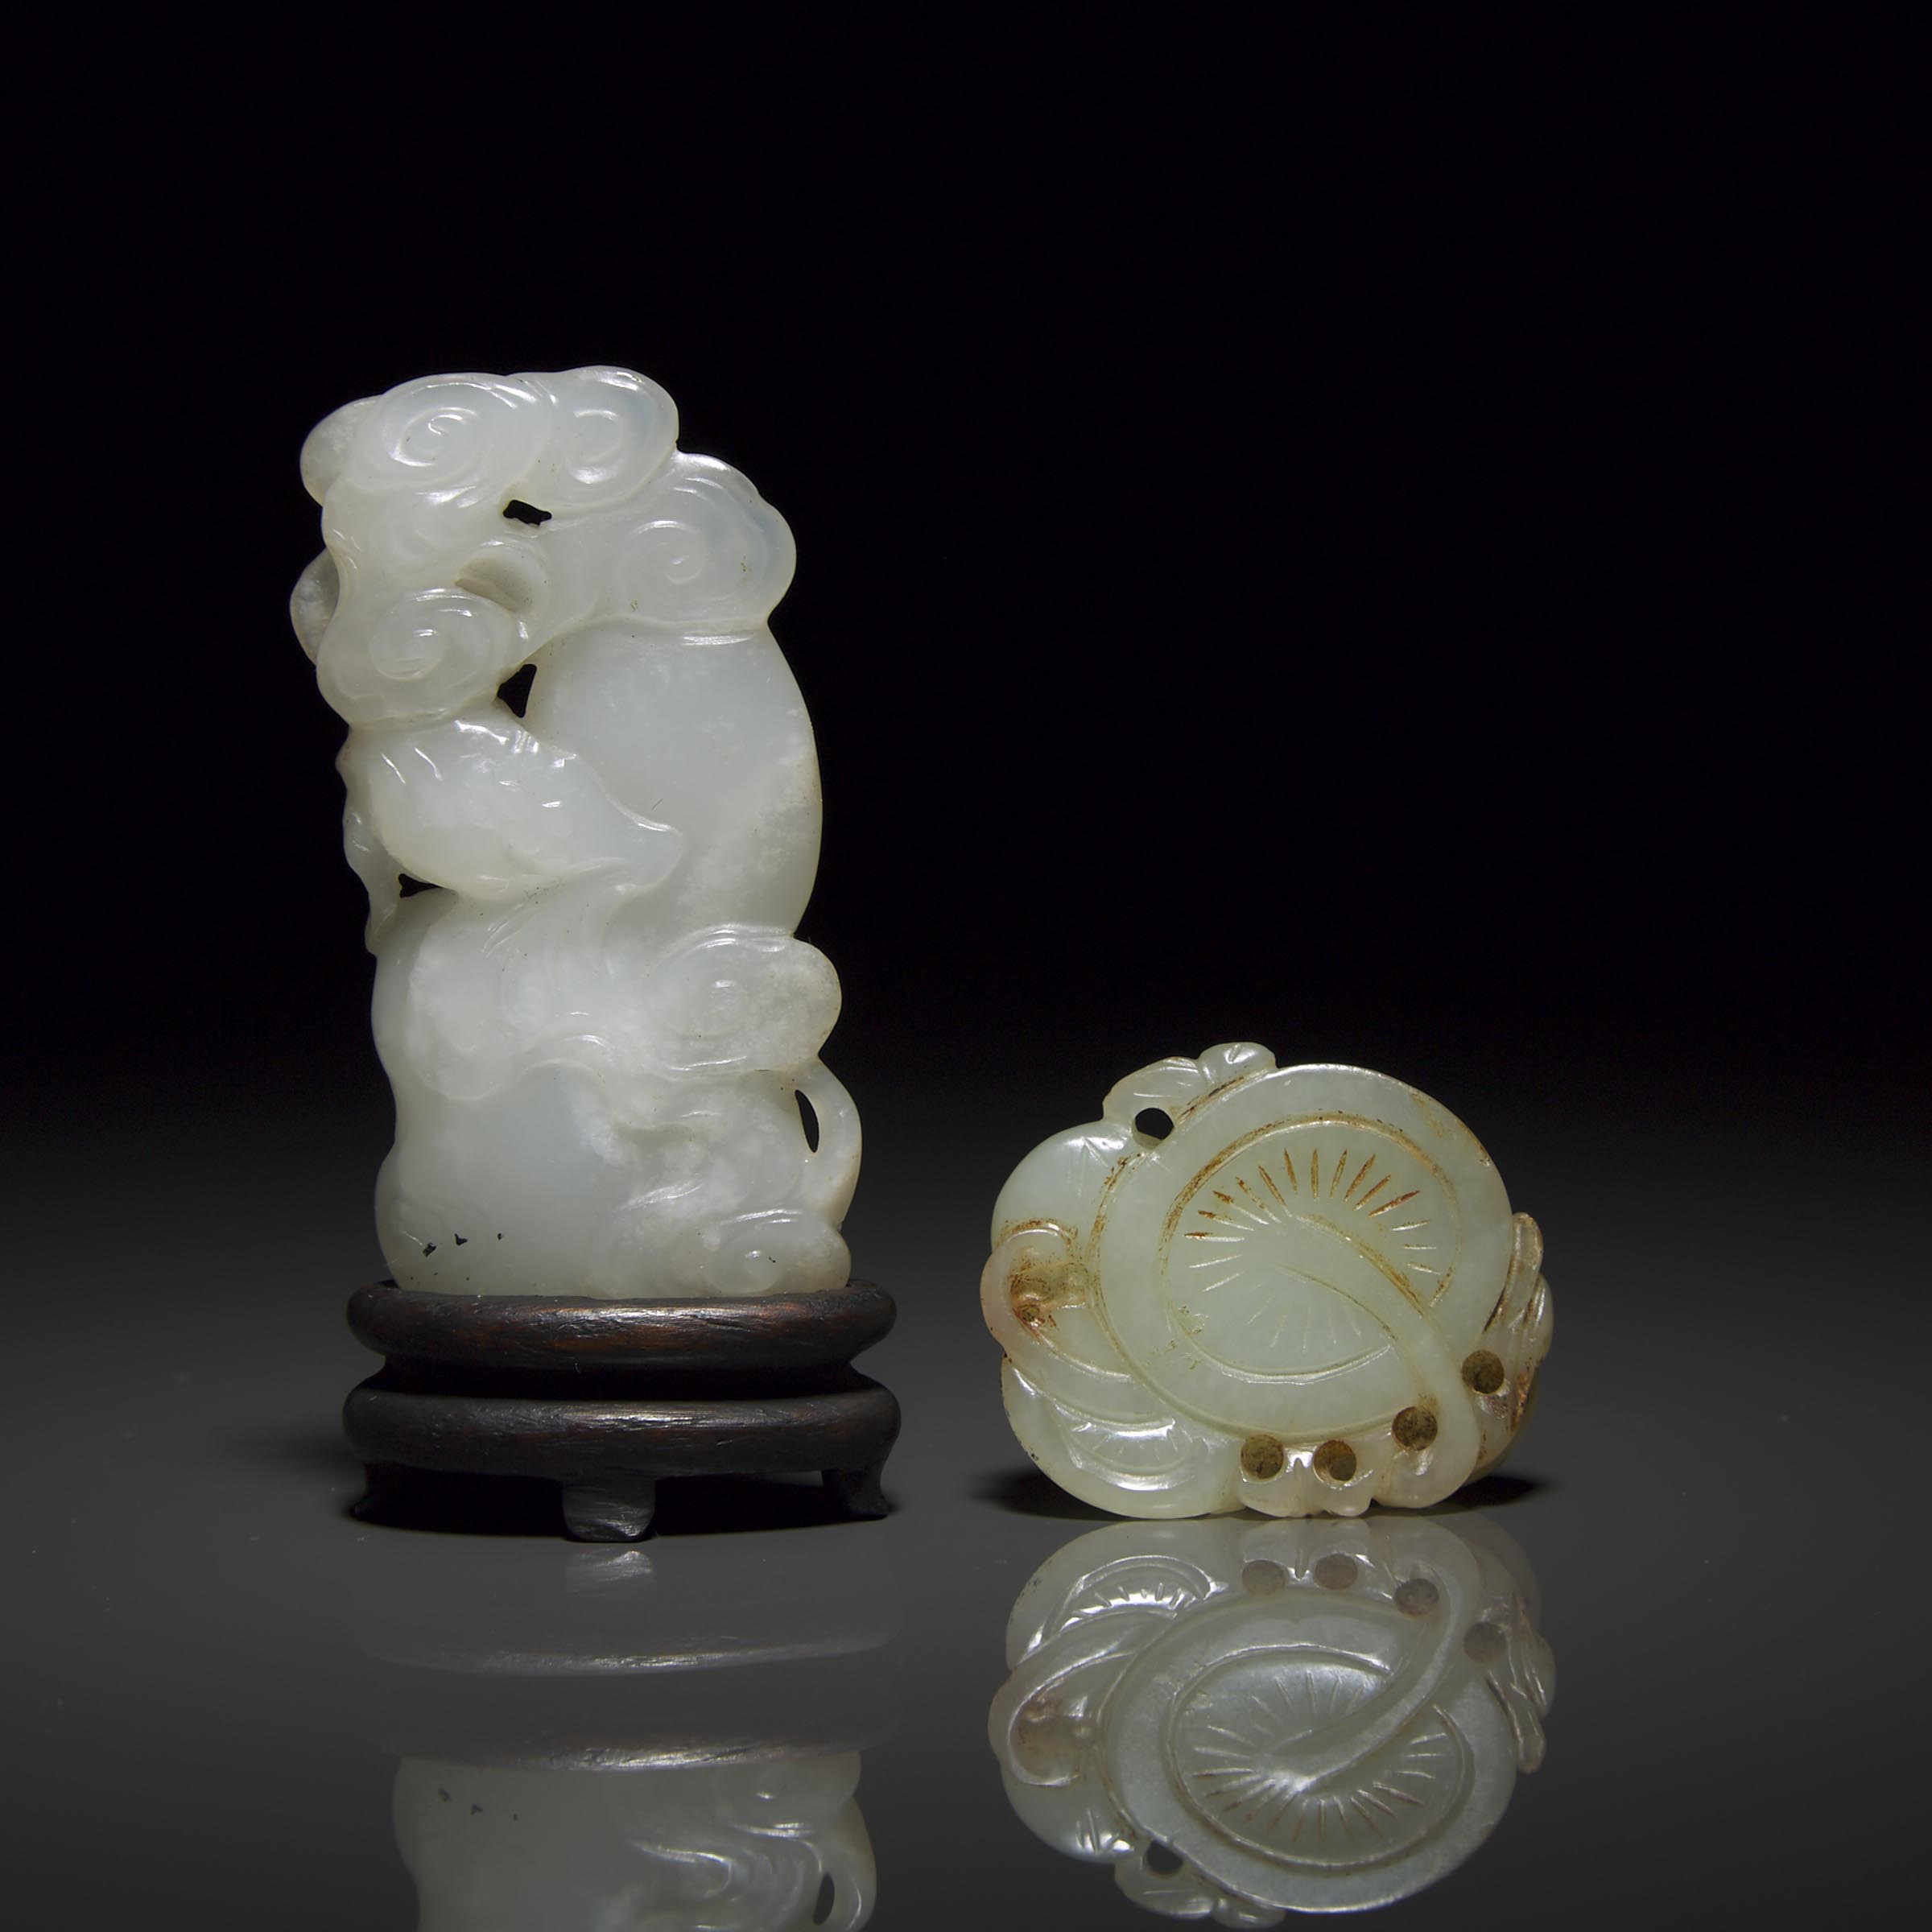 A White Jade Double-Gourd Carving, together with a Pale Celadon Jade Pendant of Mushrooms, Qing Dynasty